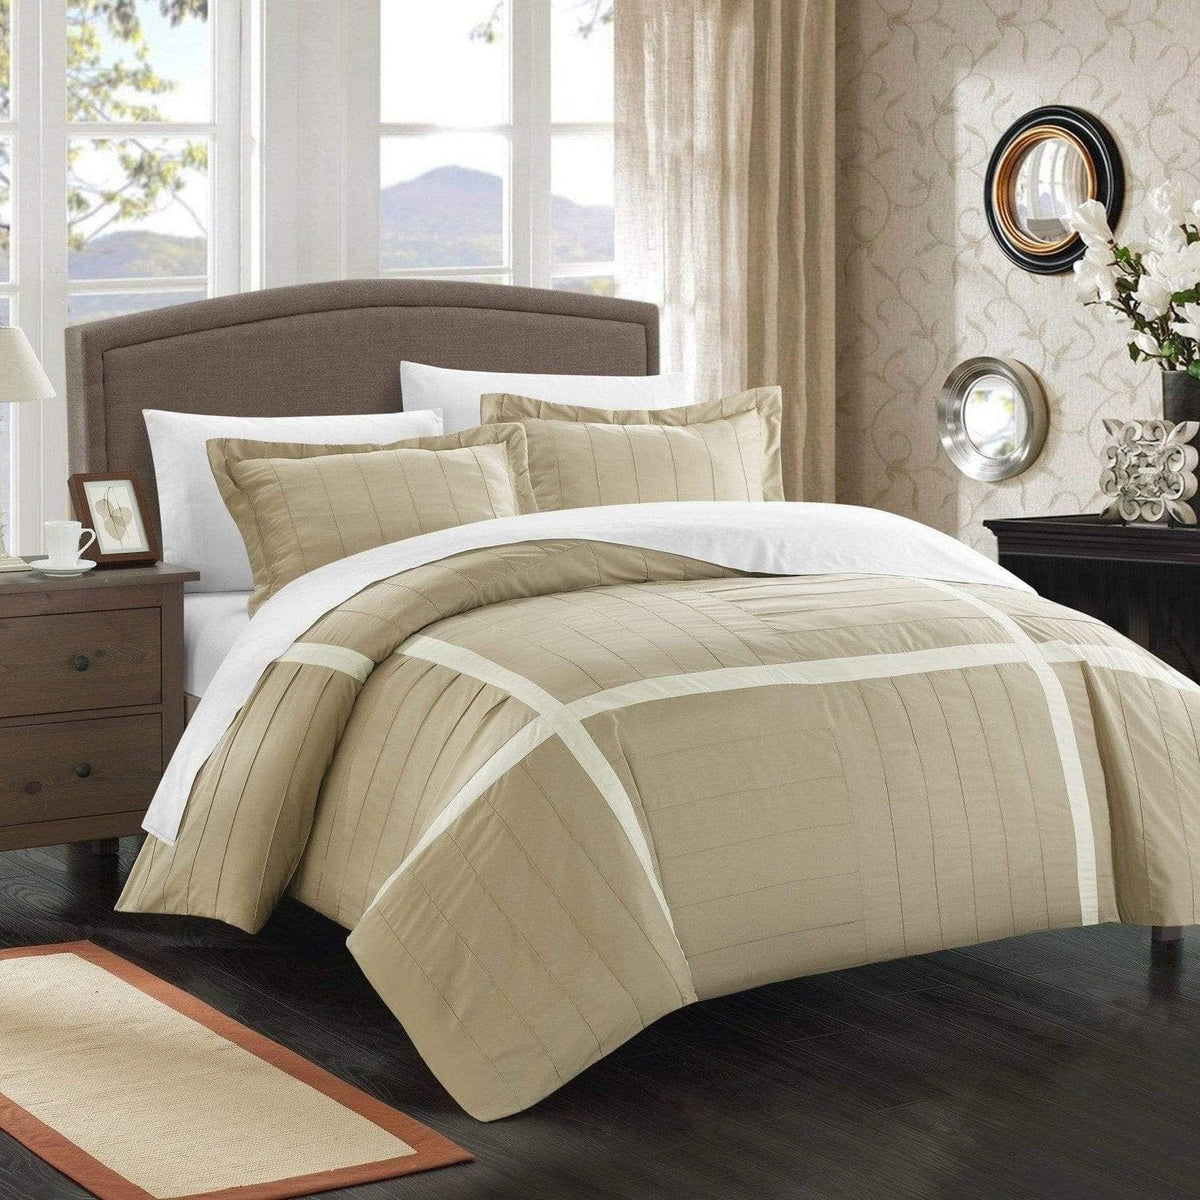 Chic Home Giselle 7 Piece Patchwork Duvet Cover Set Taupe